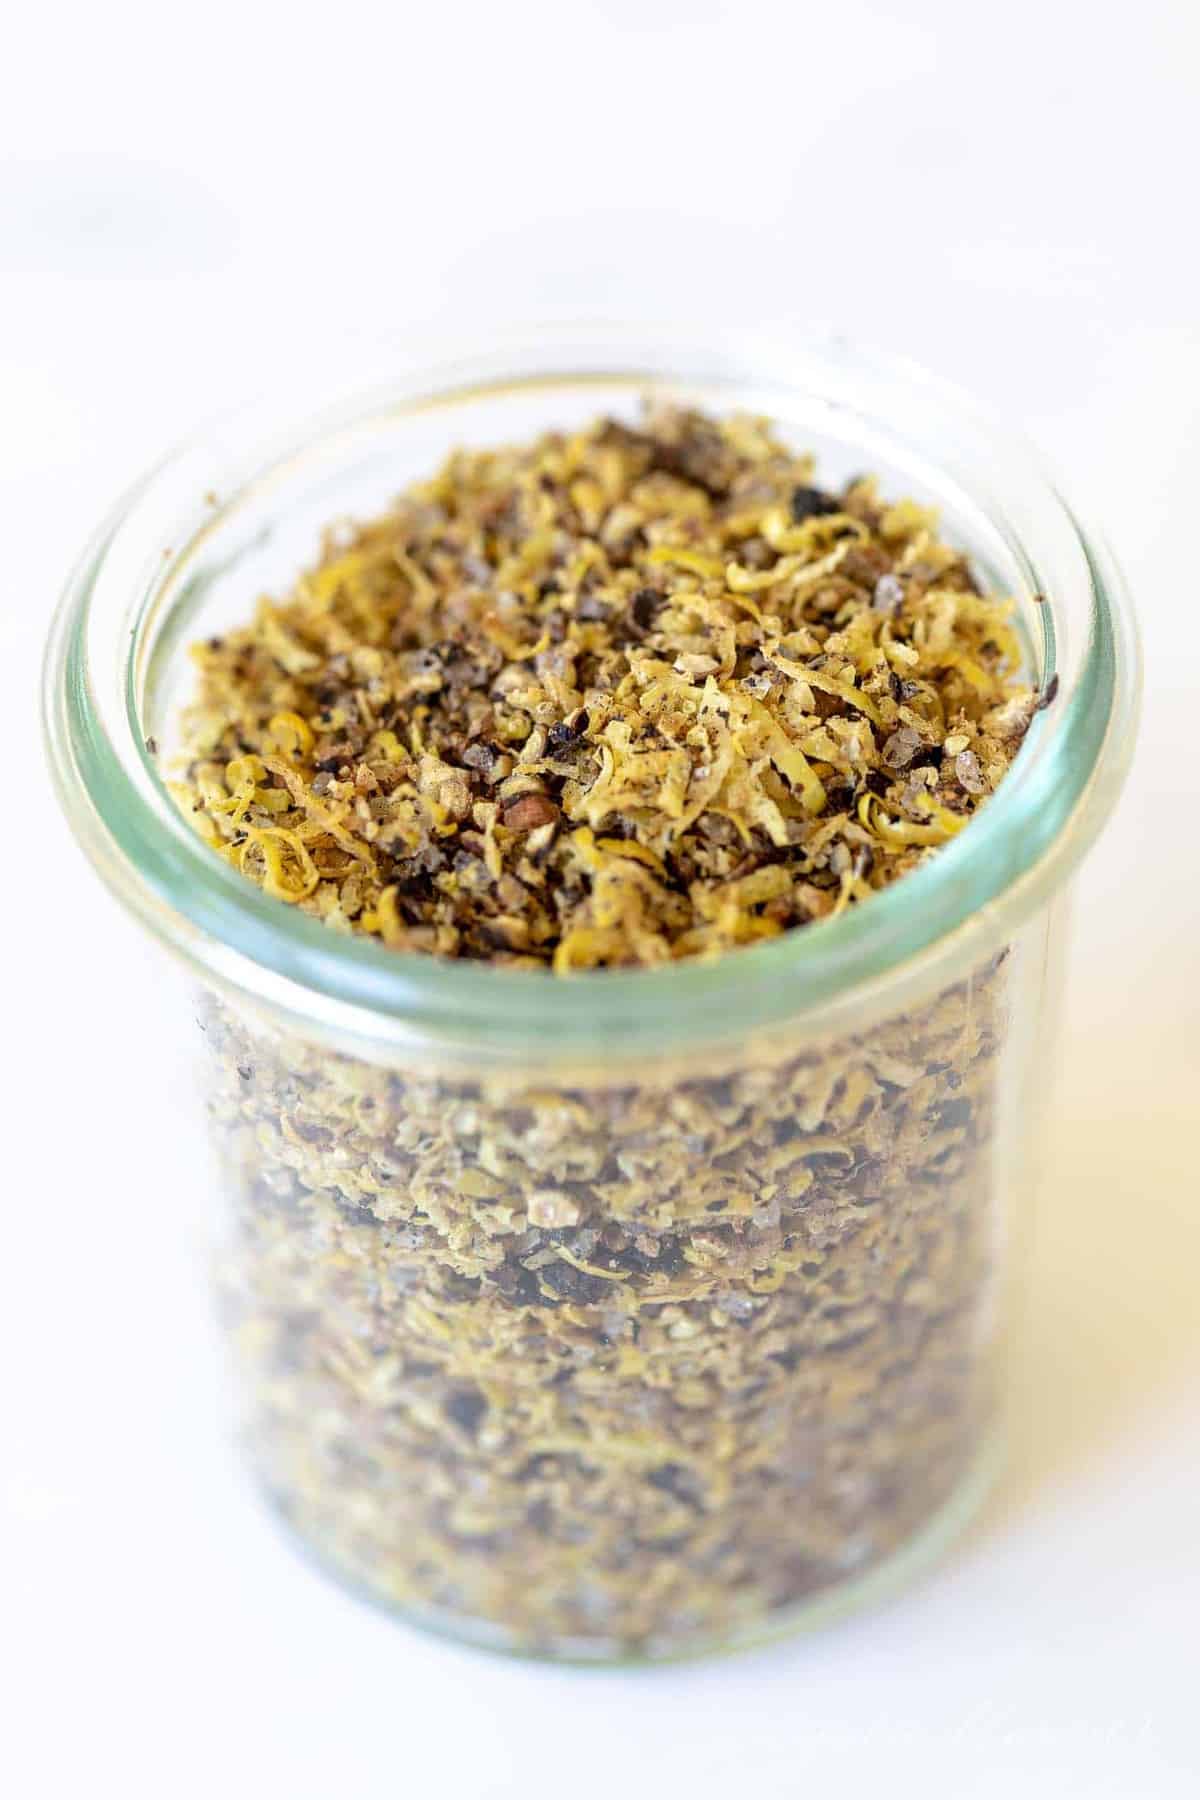 A glass jar on a marble surface, filled with lemon pepper seasoning blend.